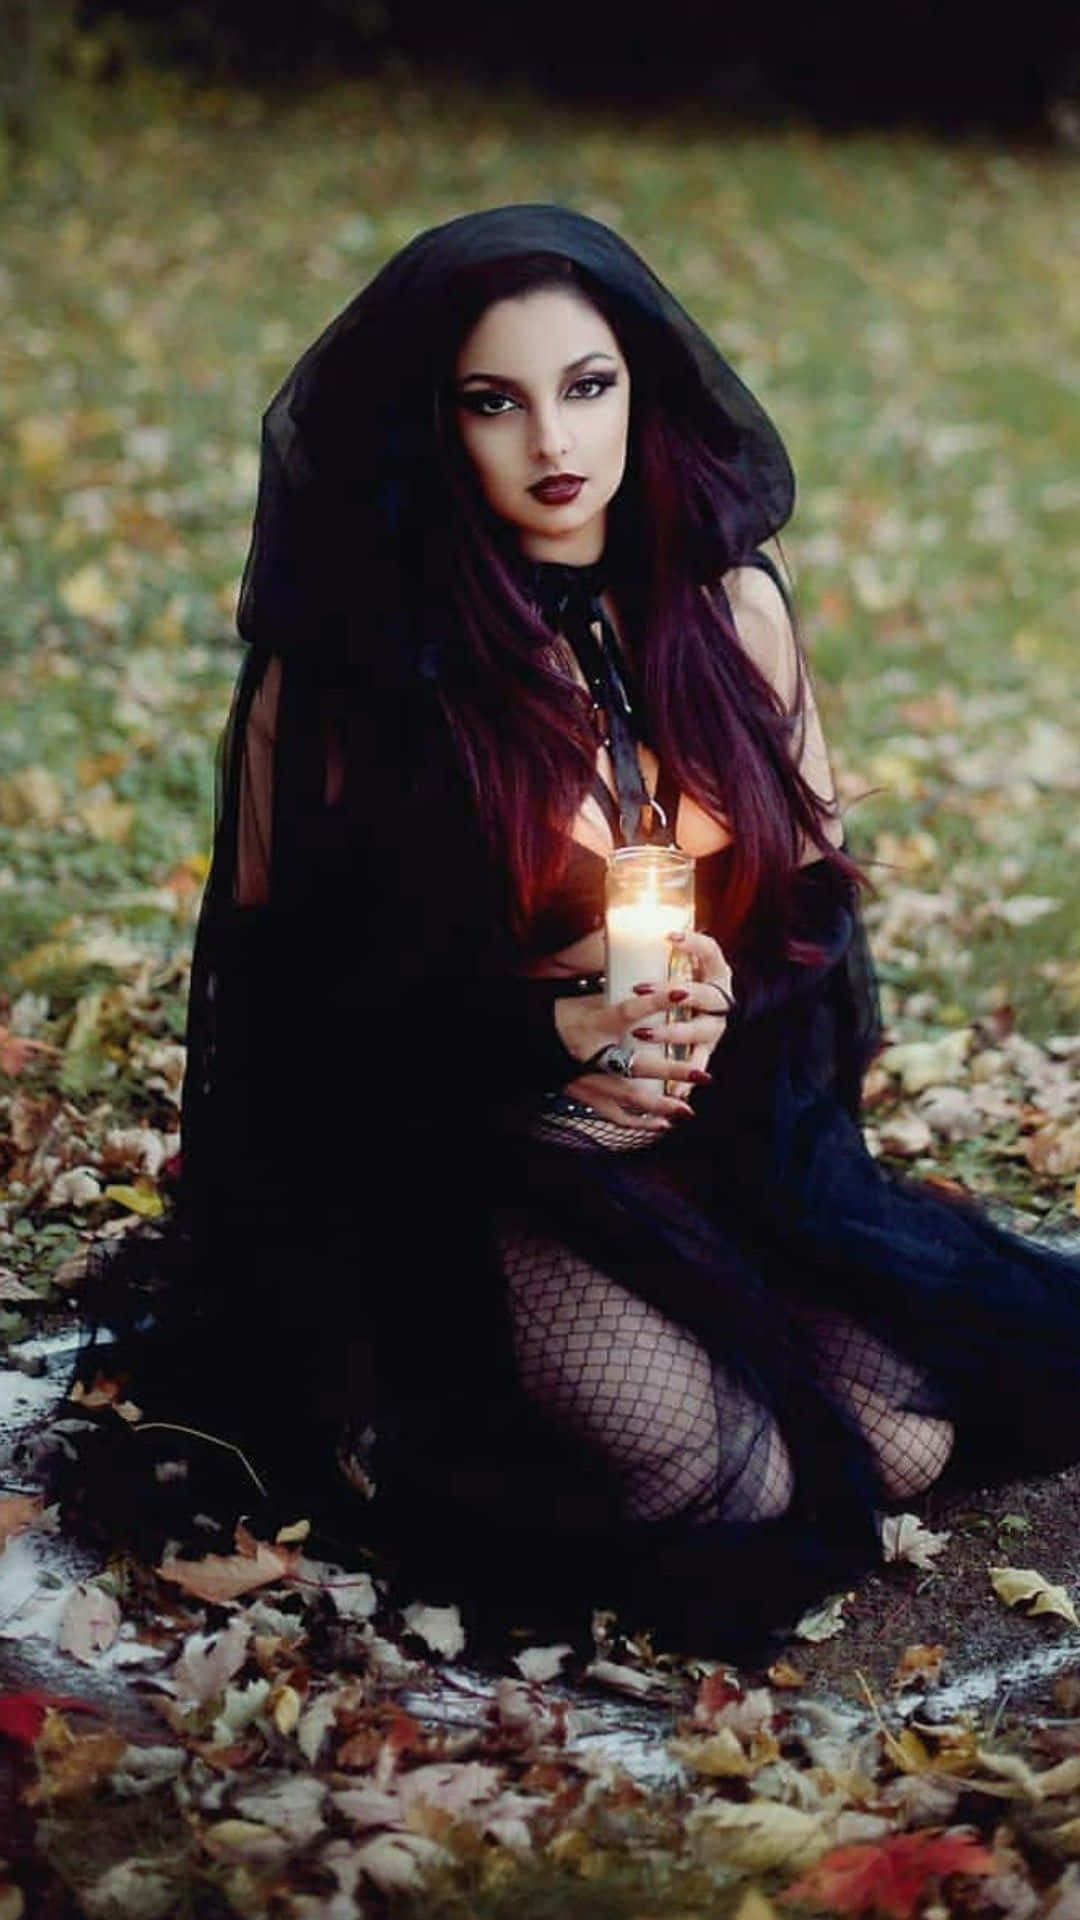 A bewitching witch costume for a spooky Halloween night. Wallpaper